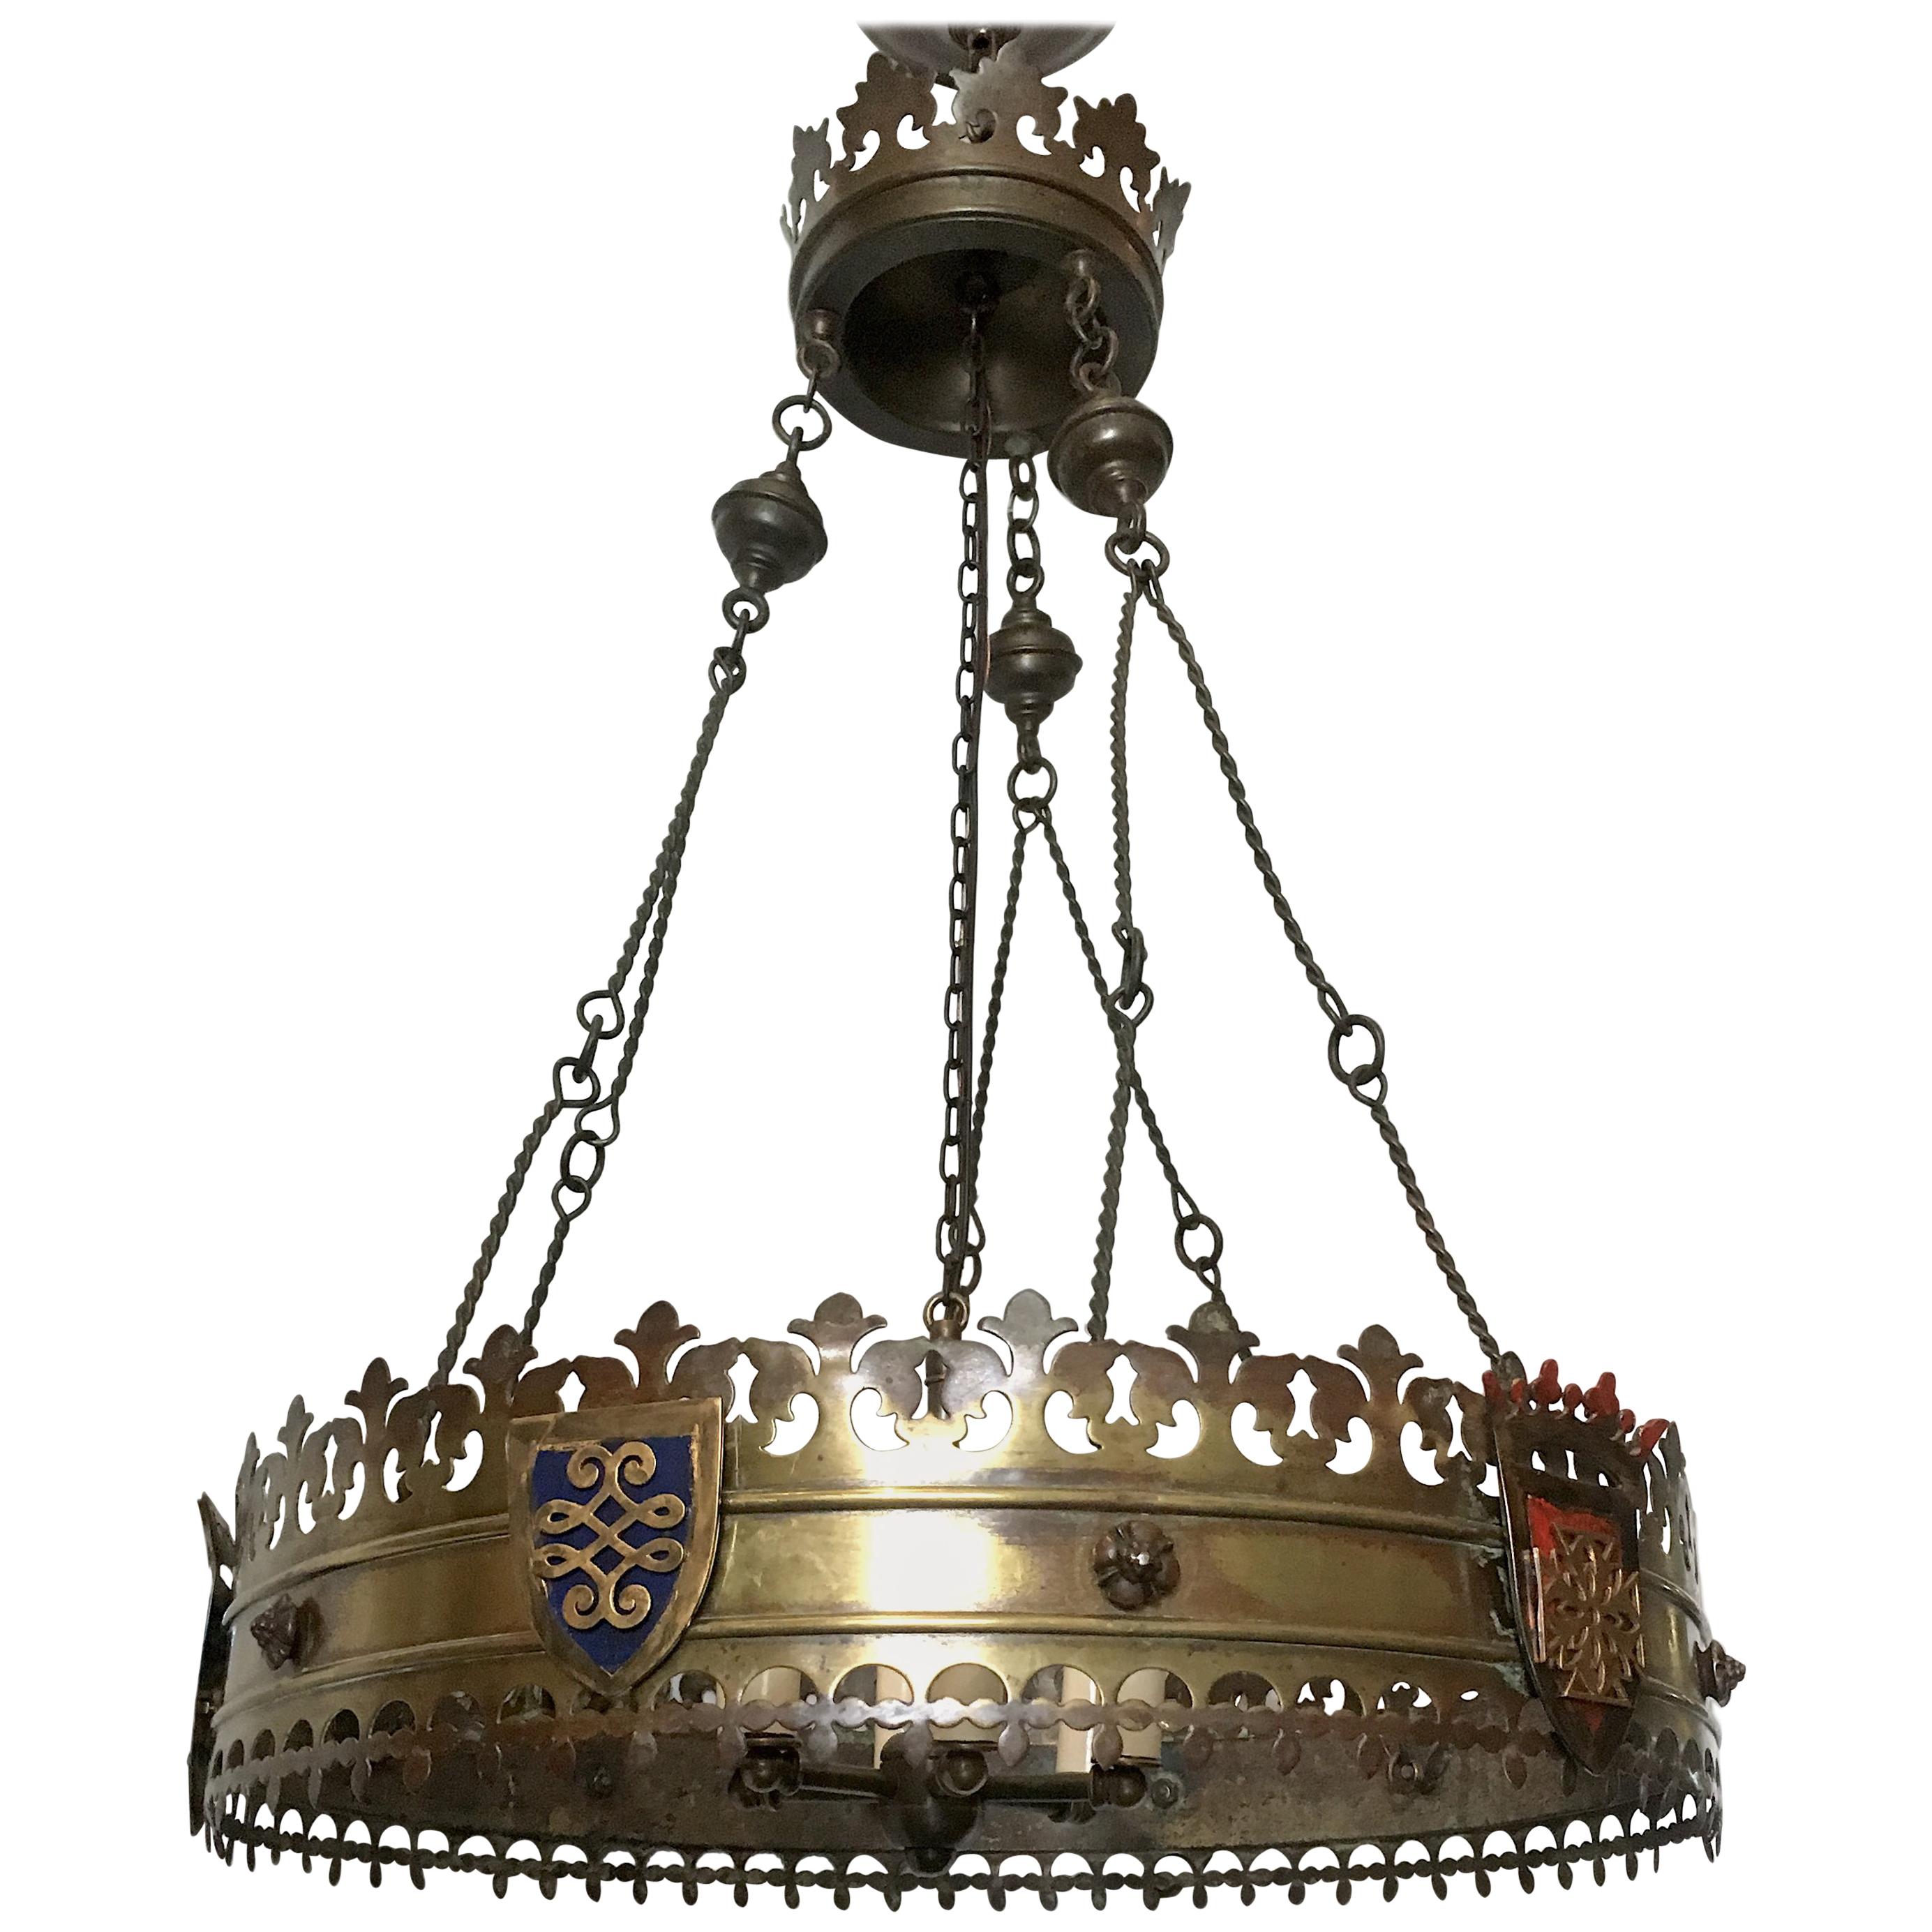 English Crown-Shaped Chandelier